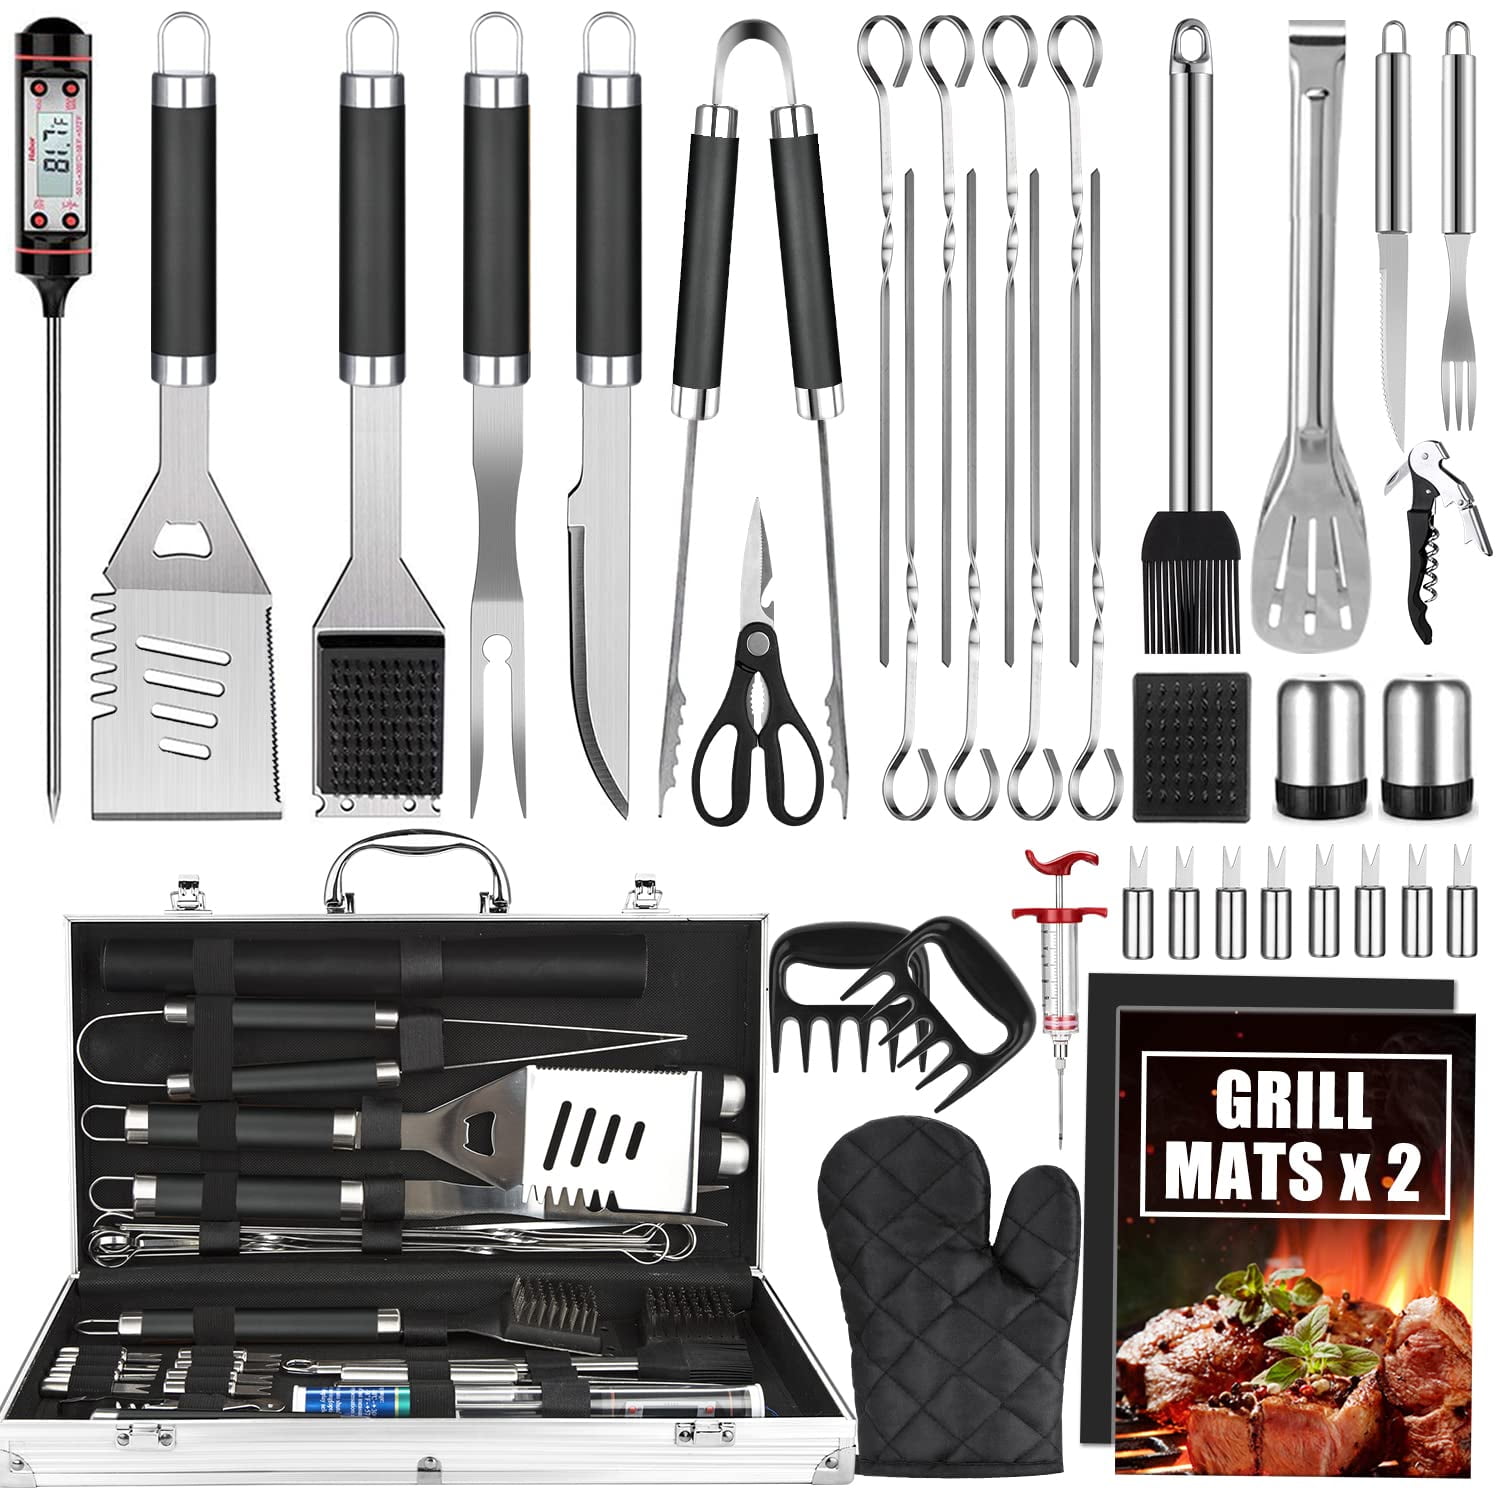  BBQ Grill BBQ Accessories, Stainless Steel Grill Tools  Grilling Accessories Grill Set Barbecue Grill Accessories for Outdoor Grill,  BBQ Tools Grill Utensils Grilling Tools : Patio, Lawn & Garden